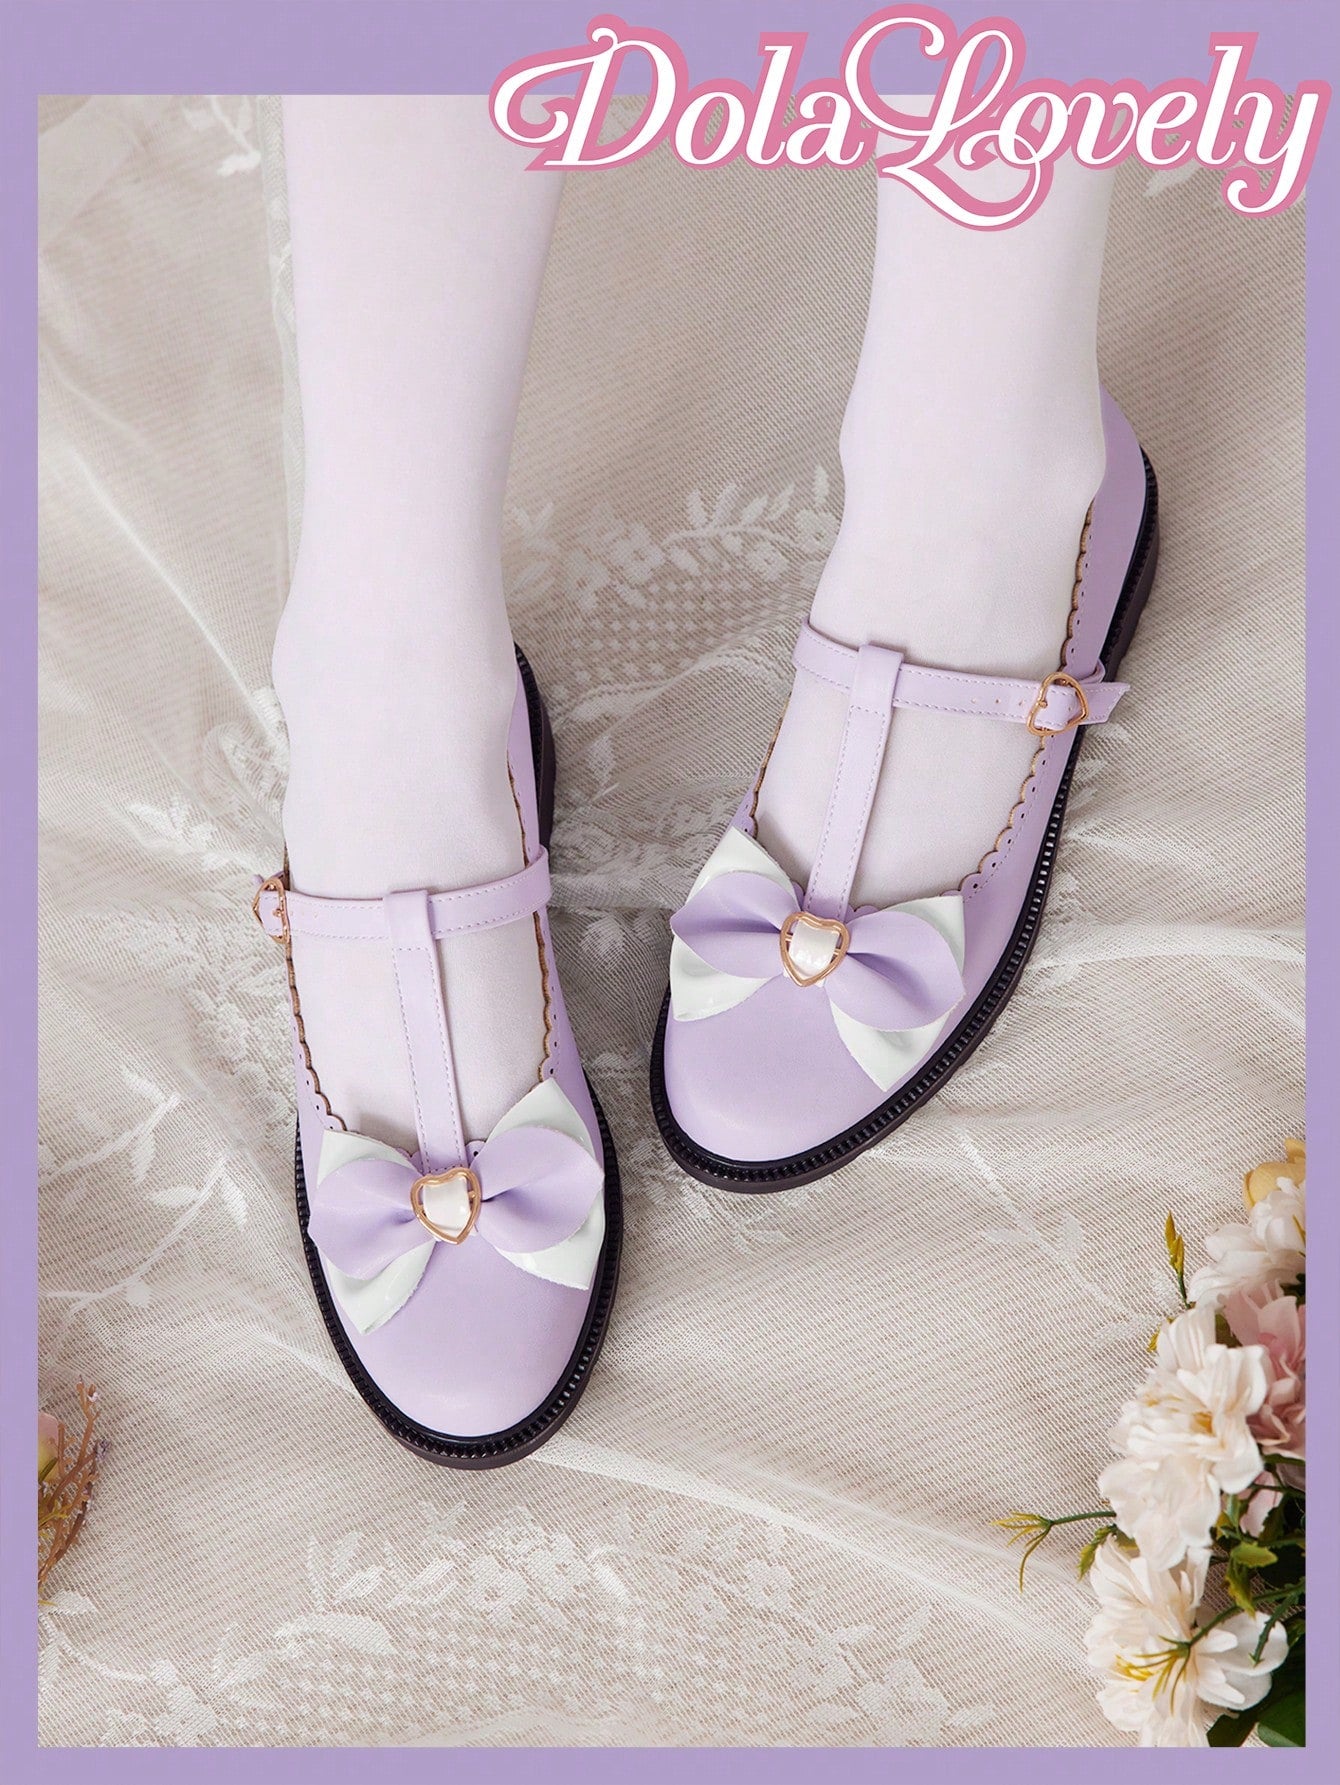 Women'S Flat Loafers, Japanese Style, Round Toe, Slip-On, Pudding Shoes For Autumn Daily Wear